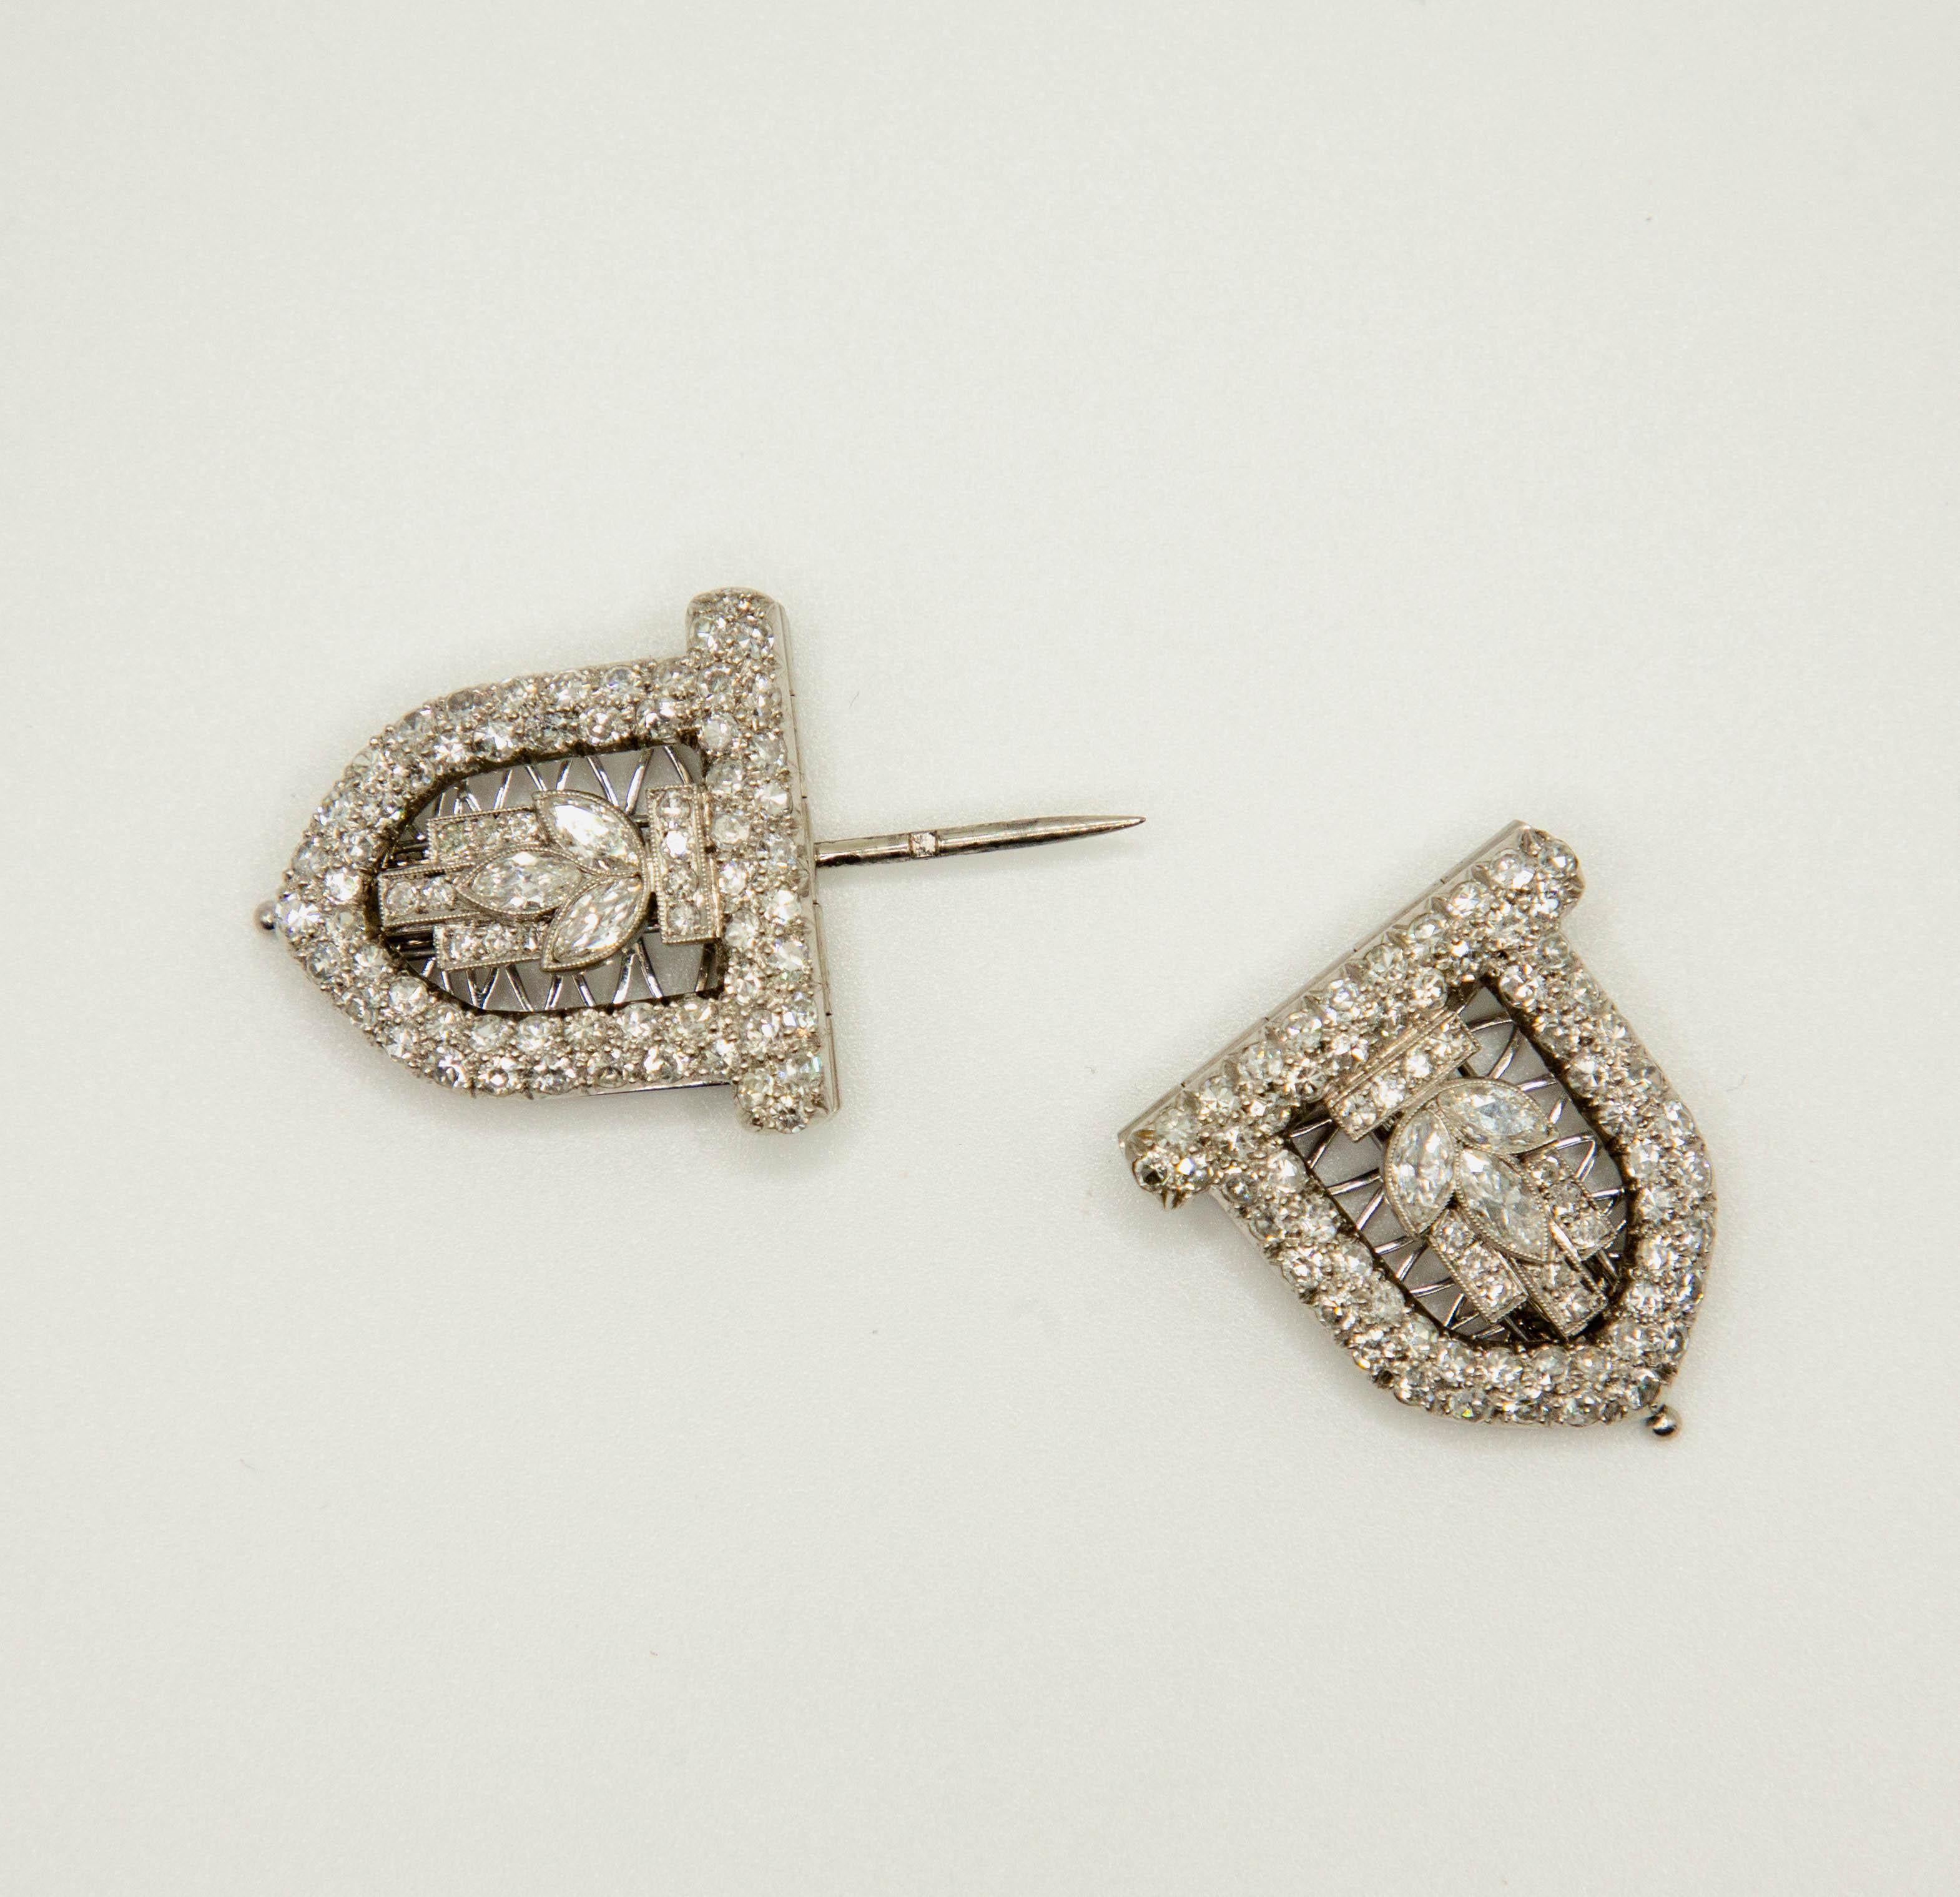 Handmade in 90/10 iridium platinum, a convertible brooch/ collar and shoe clips with six (6) marquise and 140 accent  single cut diamonds of excellent make and proportions. Diamonds range from VS- flawless clarity, E colour. Round diamonds are